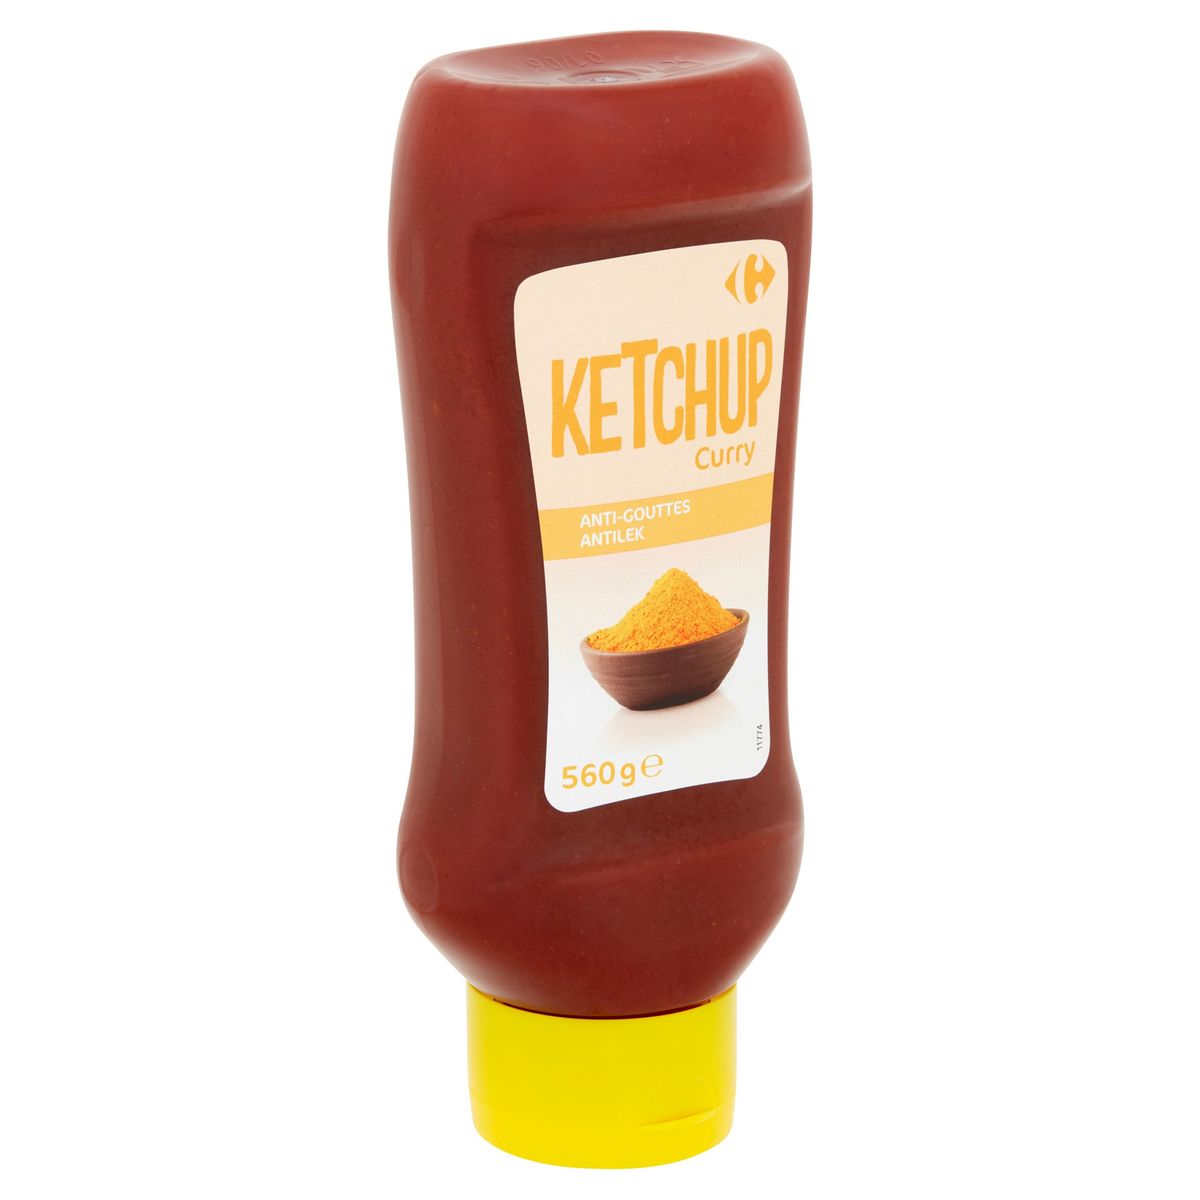 Carrefour Ketchup Curry 560 g